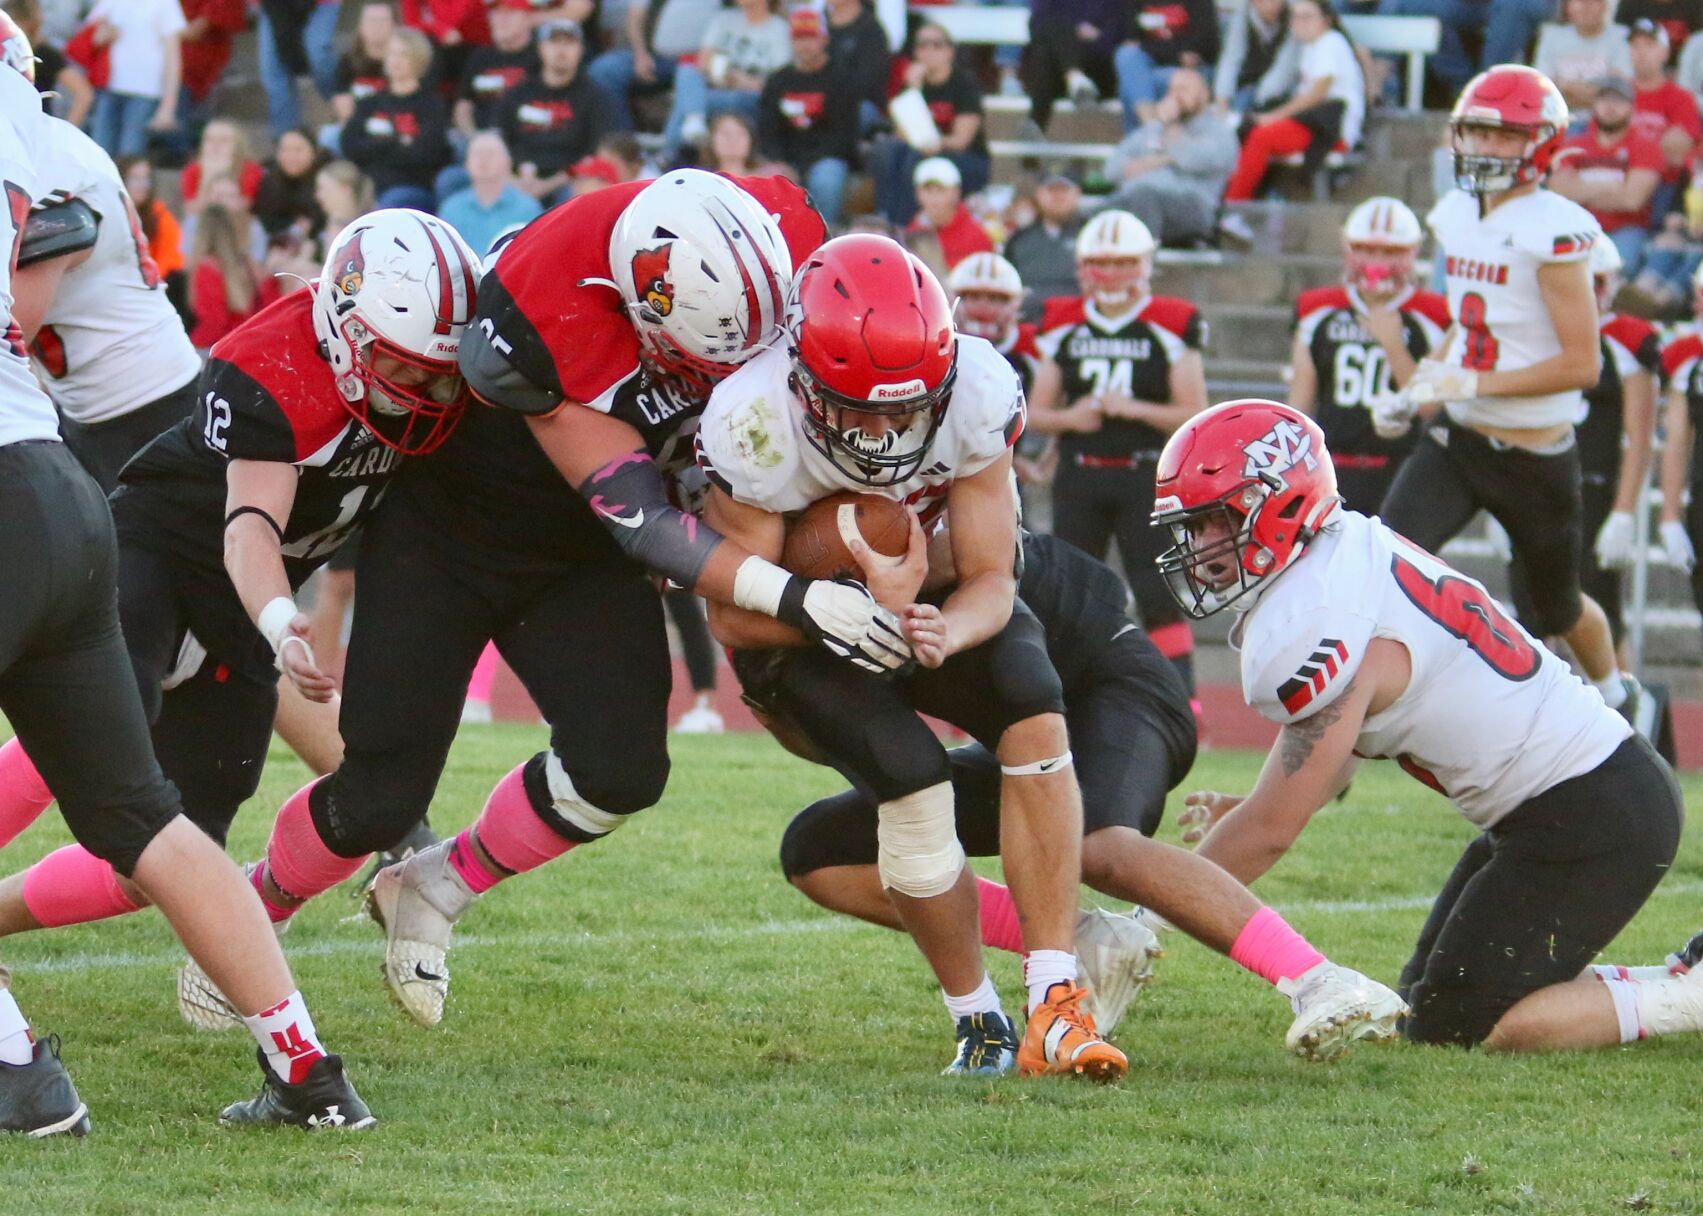 Cardinals to playoffs after holding off McCook